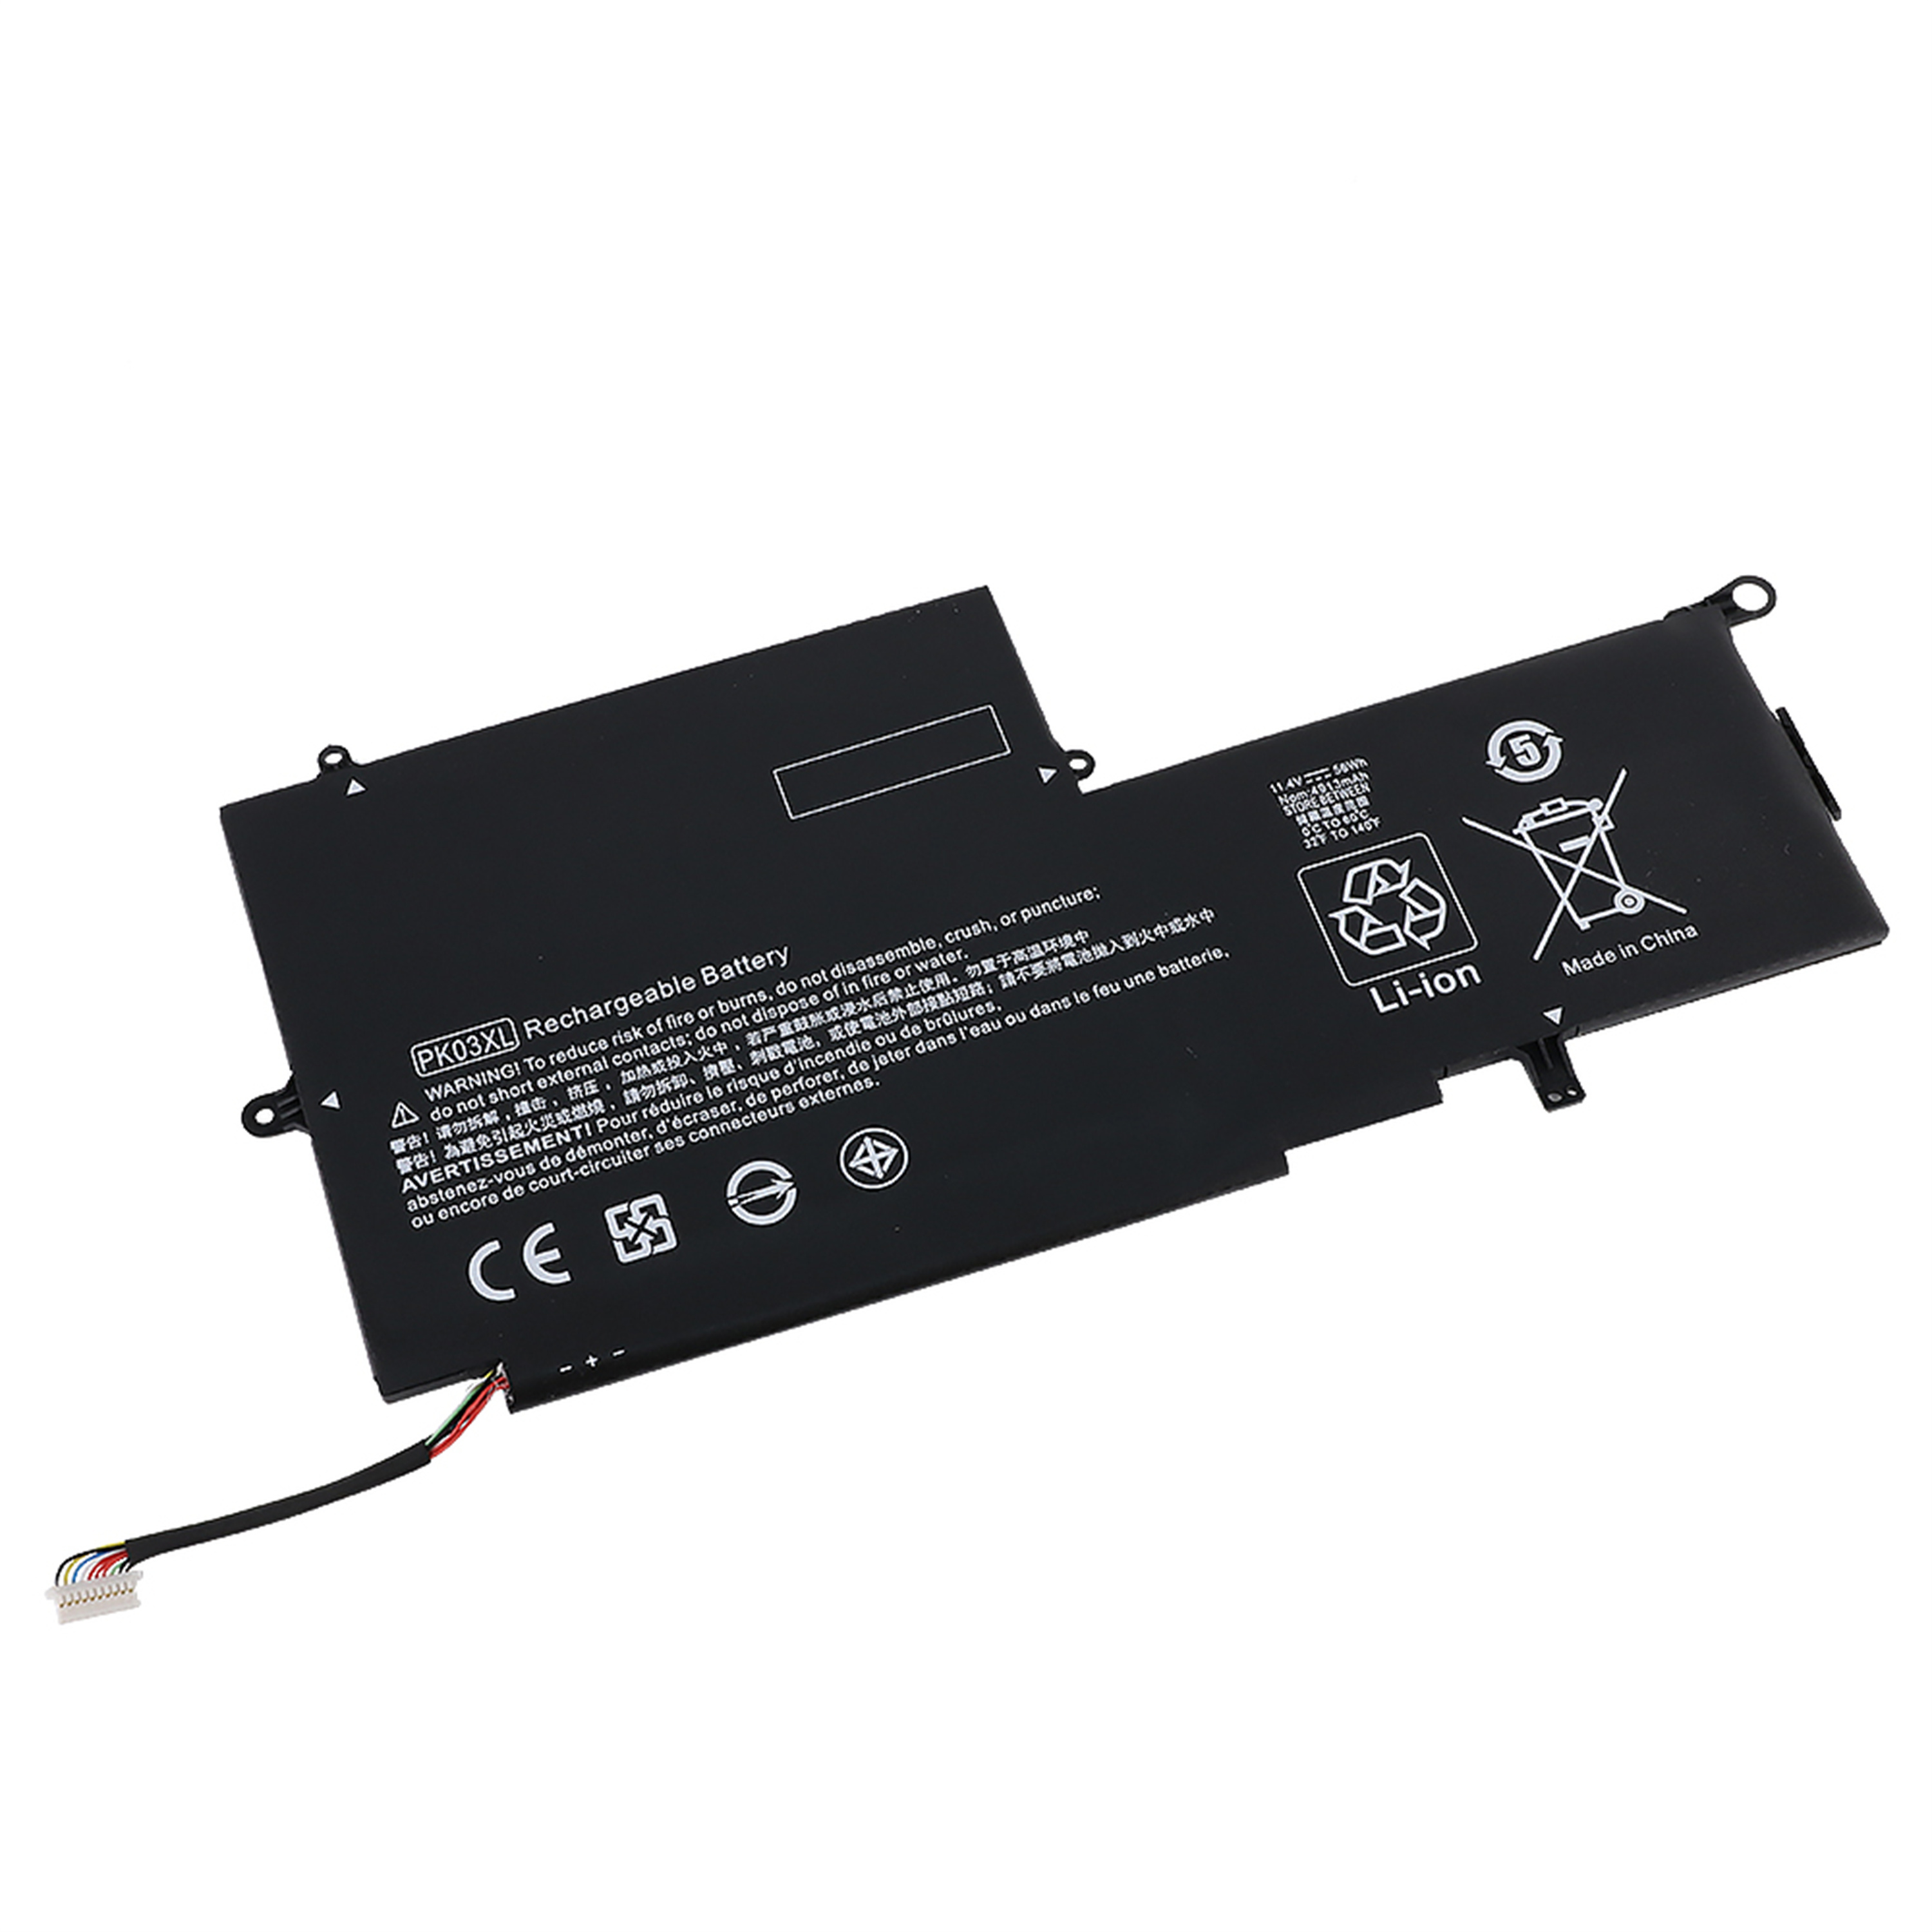 PK03XL rechargeable lithium ion Notebook battery Laptop battery for HP Spectre x360 13-4000ni (L5E62ea) Spectre x360 134000ni (L5E62ea) Spectre x360 13-4000nn (M0C29ea)